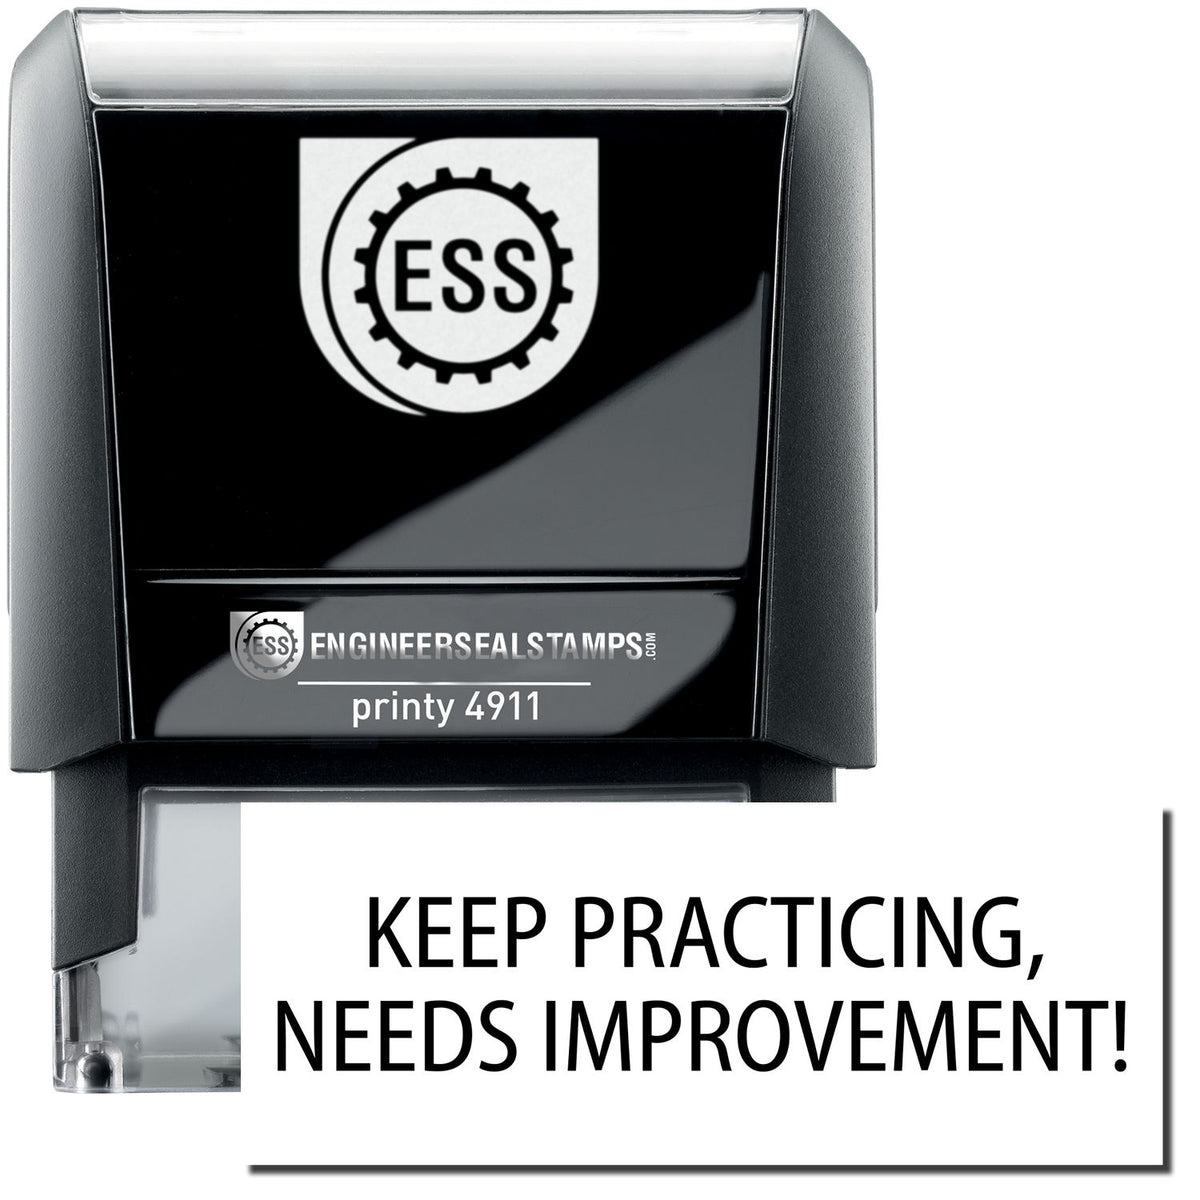 A self-inking stamp with a stamped image showing how the text &quot;KEEP PRACTICING, NEEDS IMPROVEMENT!&quot; is displayed after stamping.